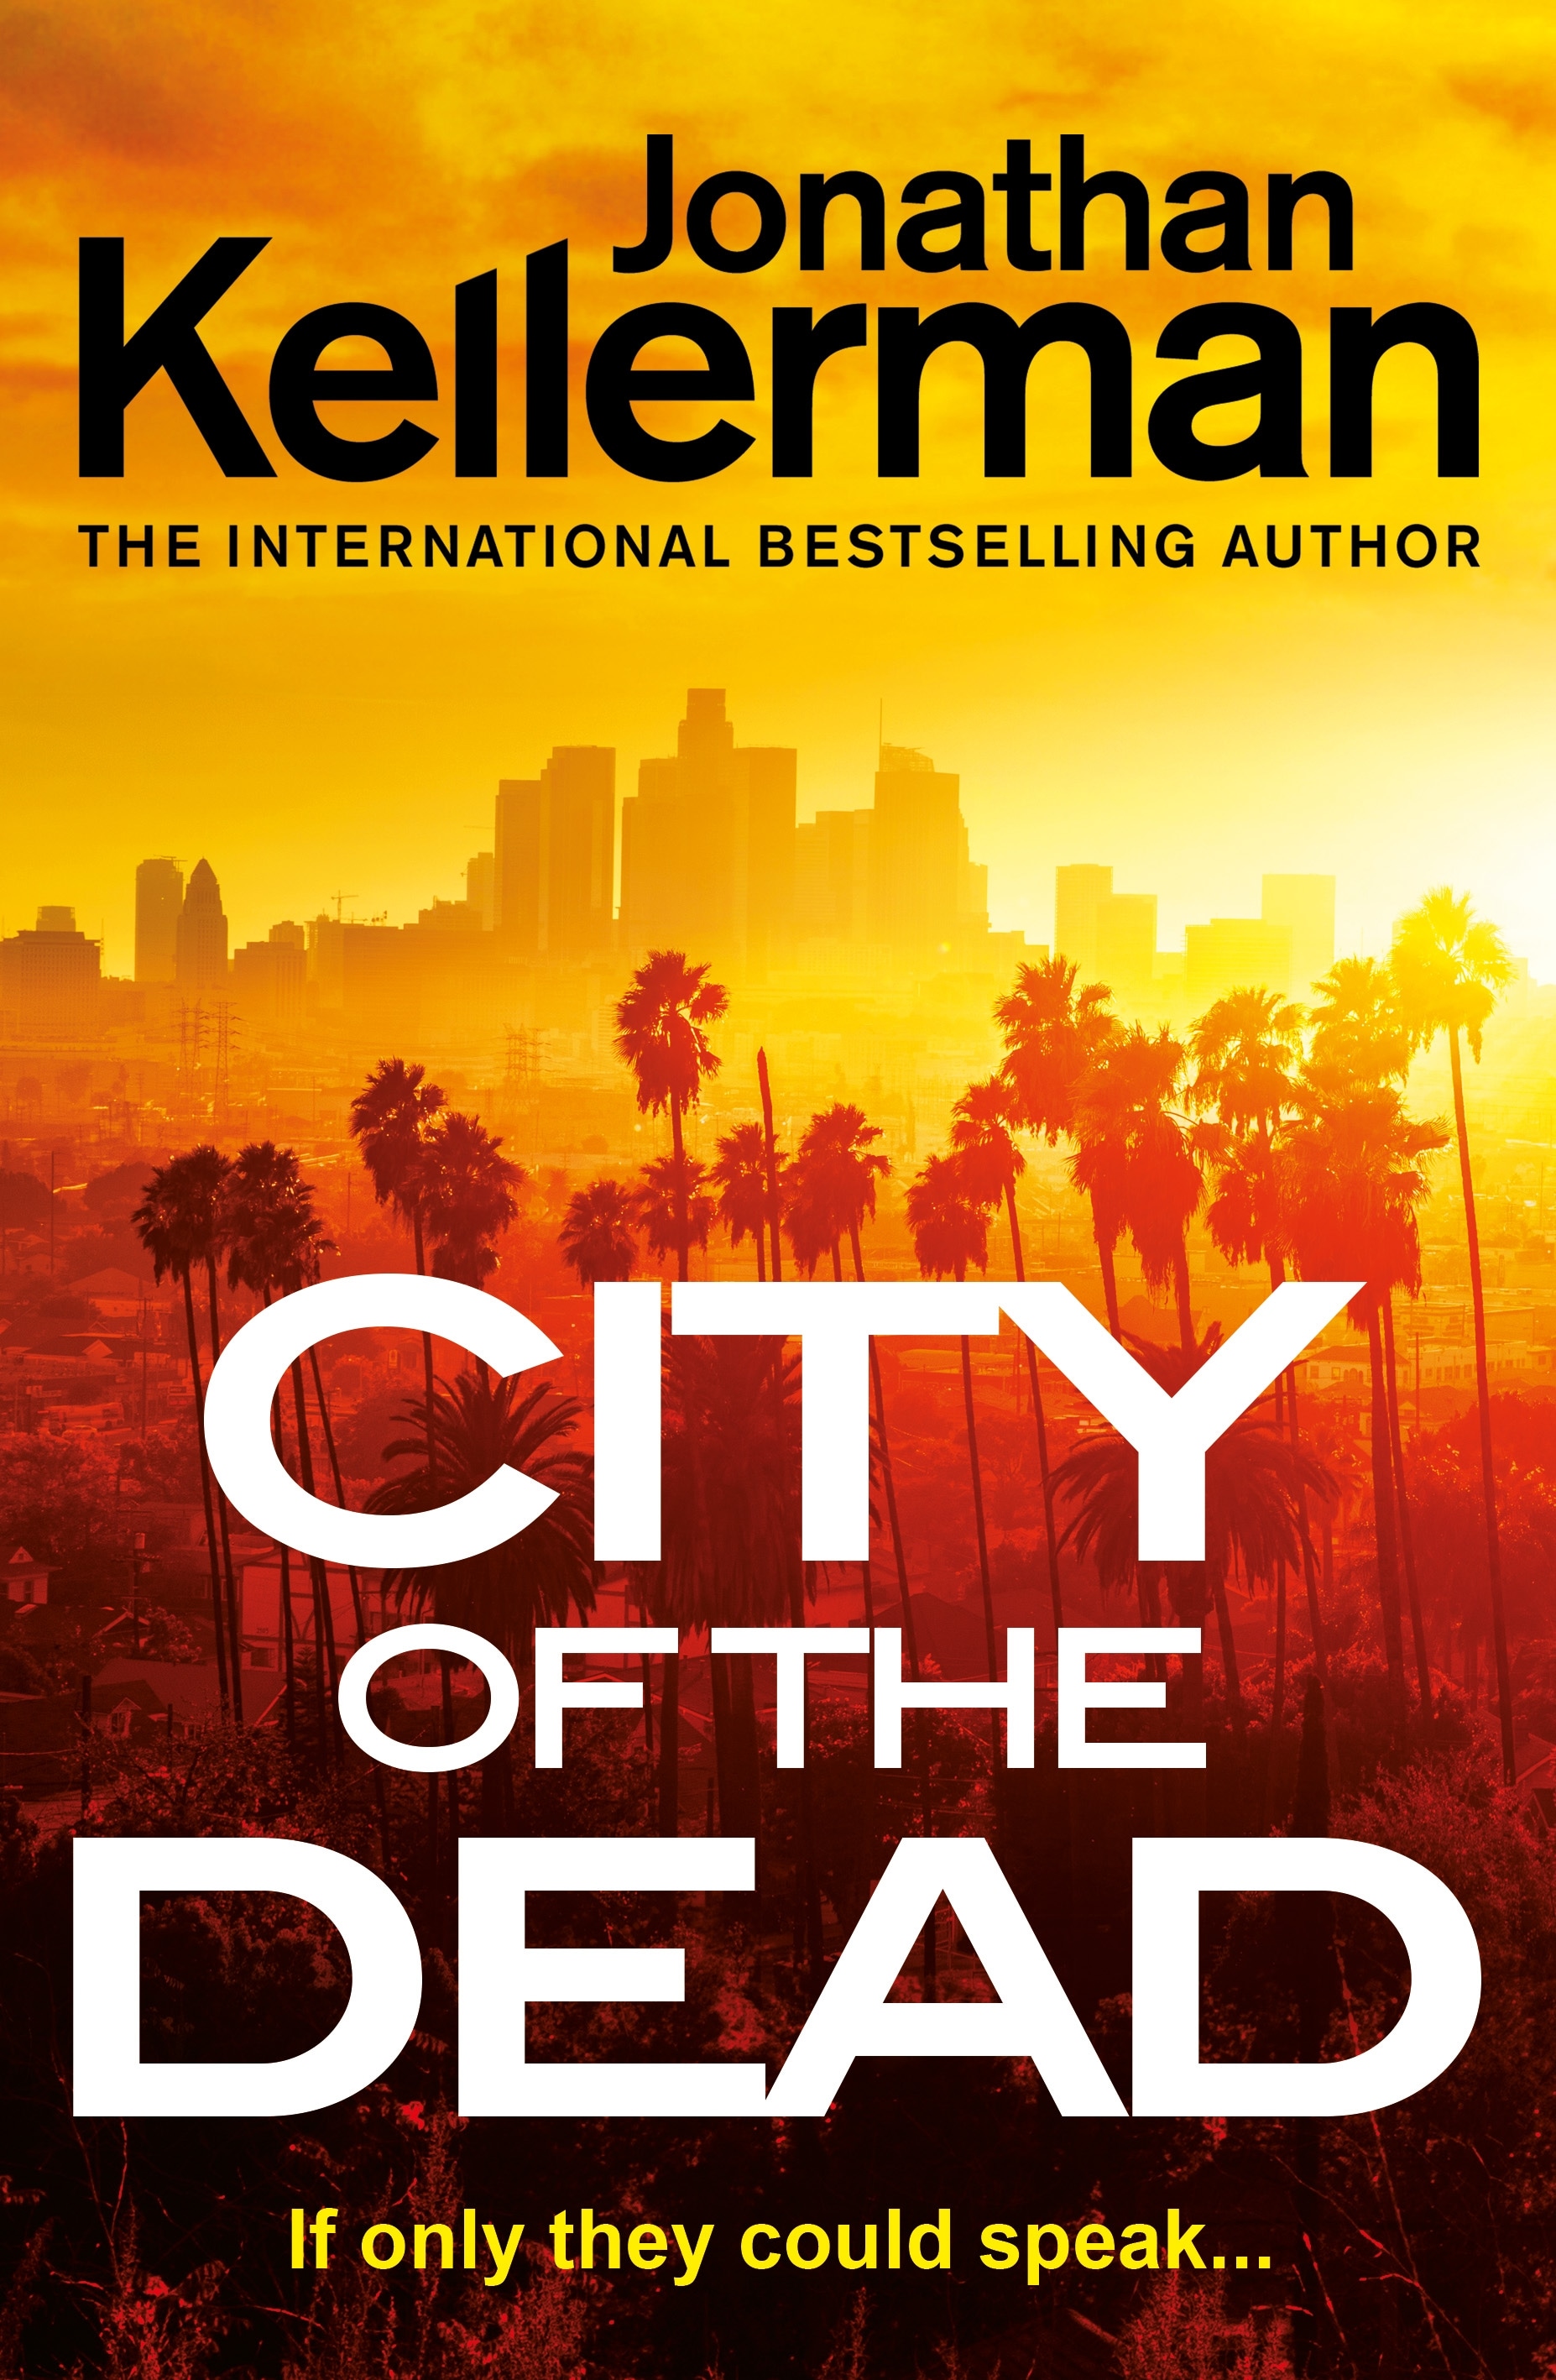 Book “City of the Dead” by Jonathan Kellerman — February 17, 2022